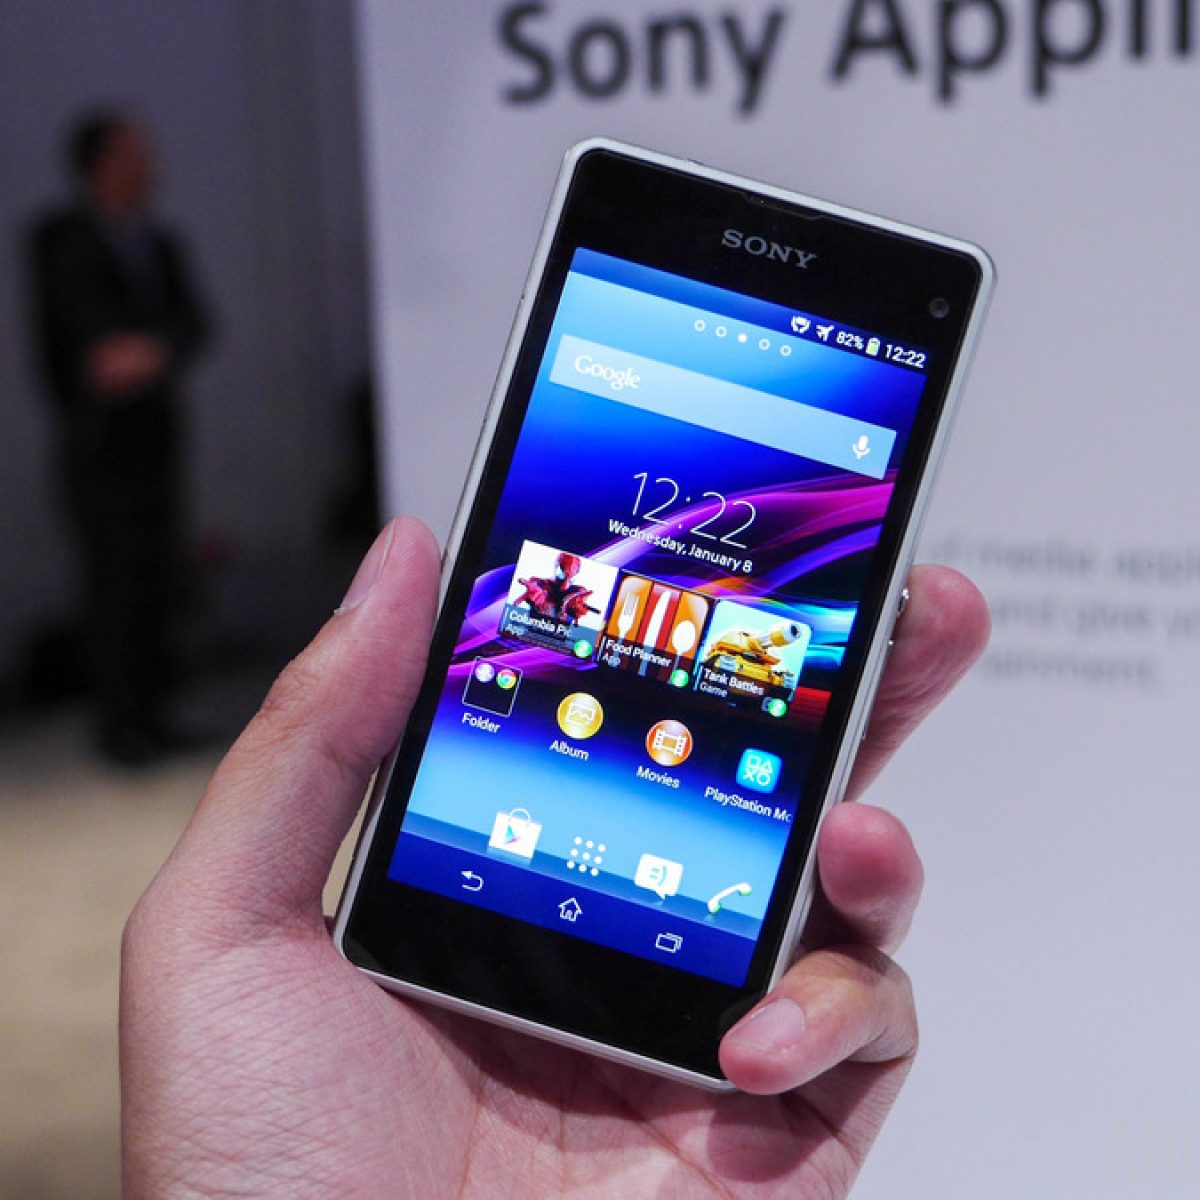 Xperia Z1 Data Sharing: A Quick How-To Guide